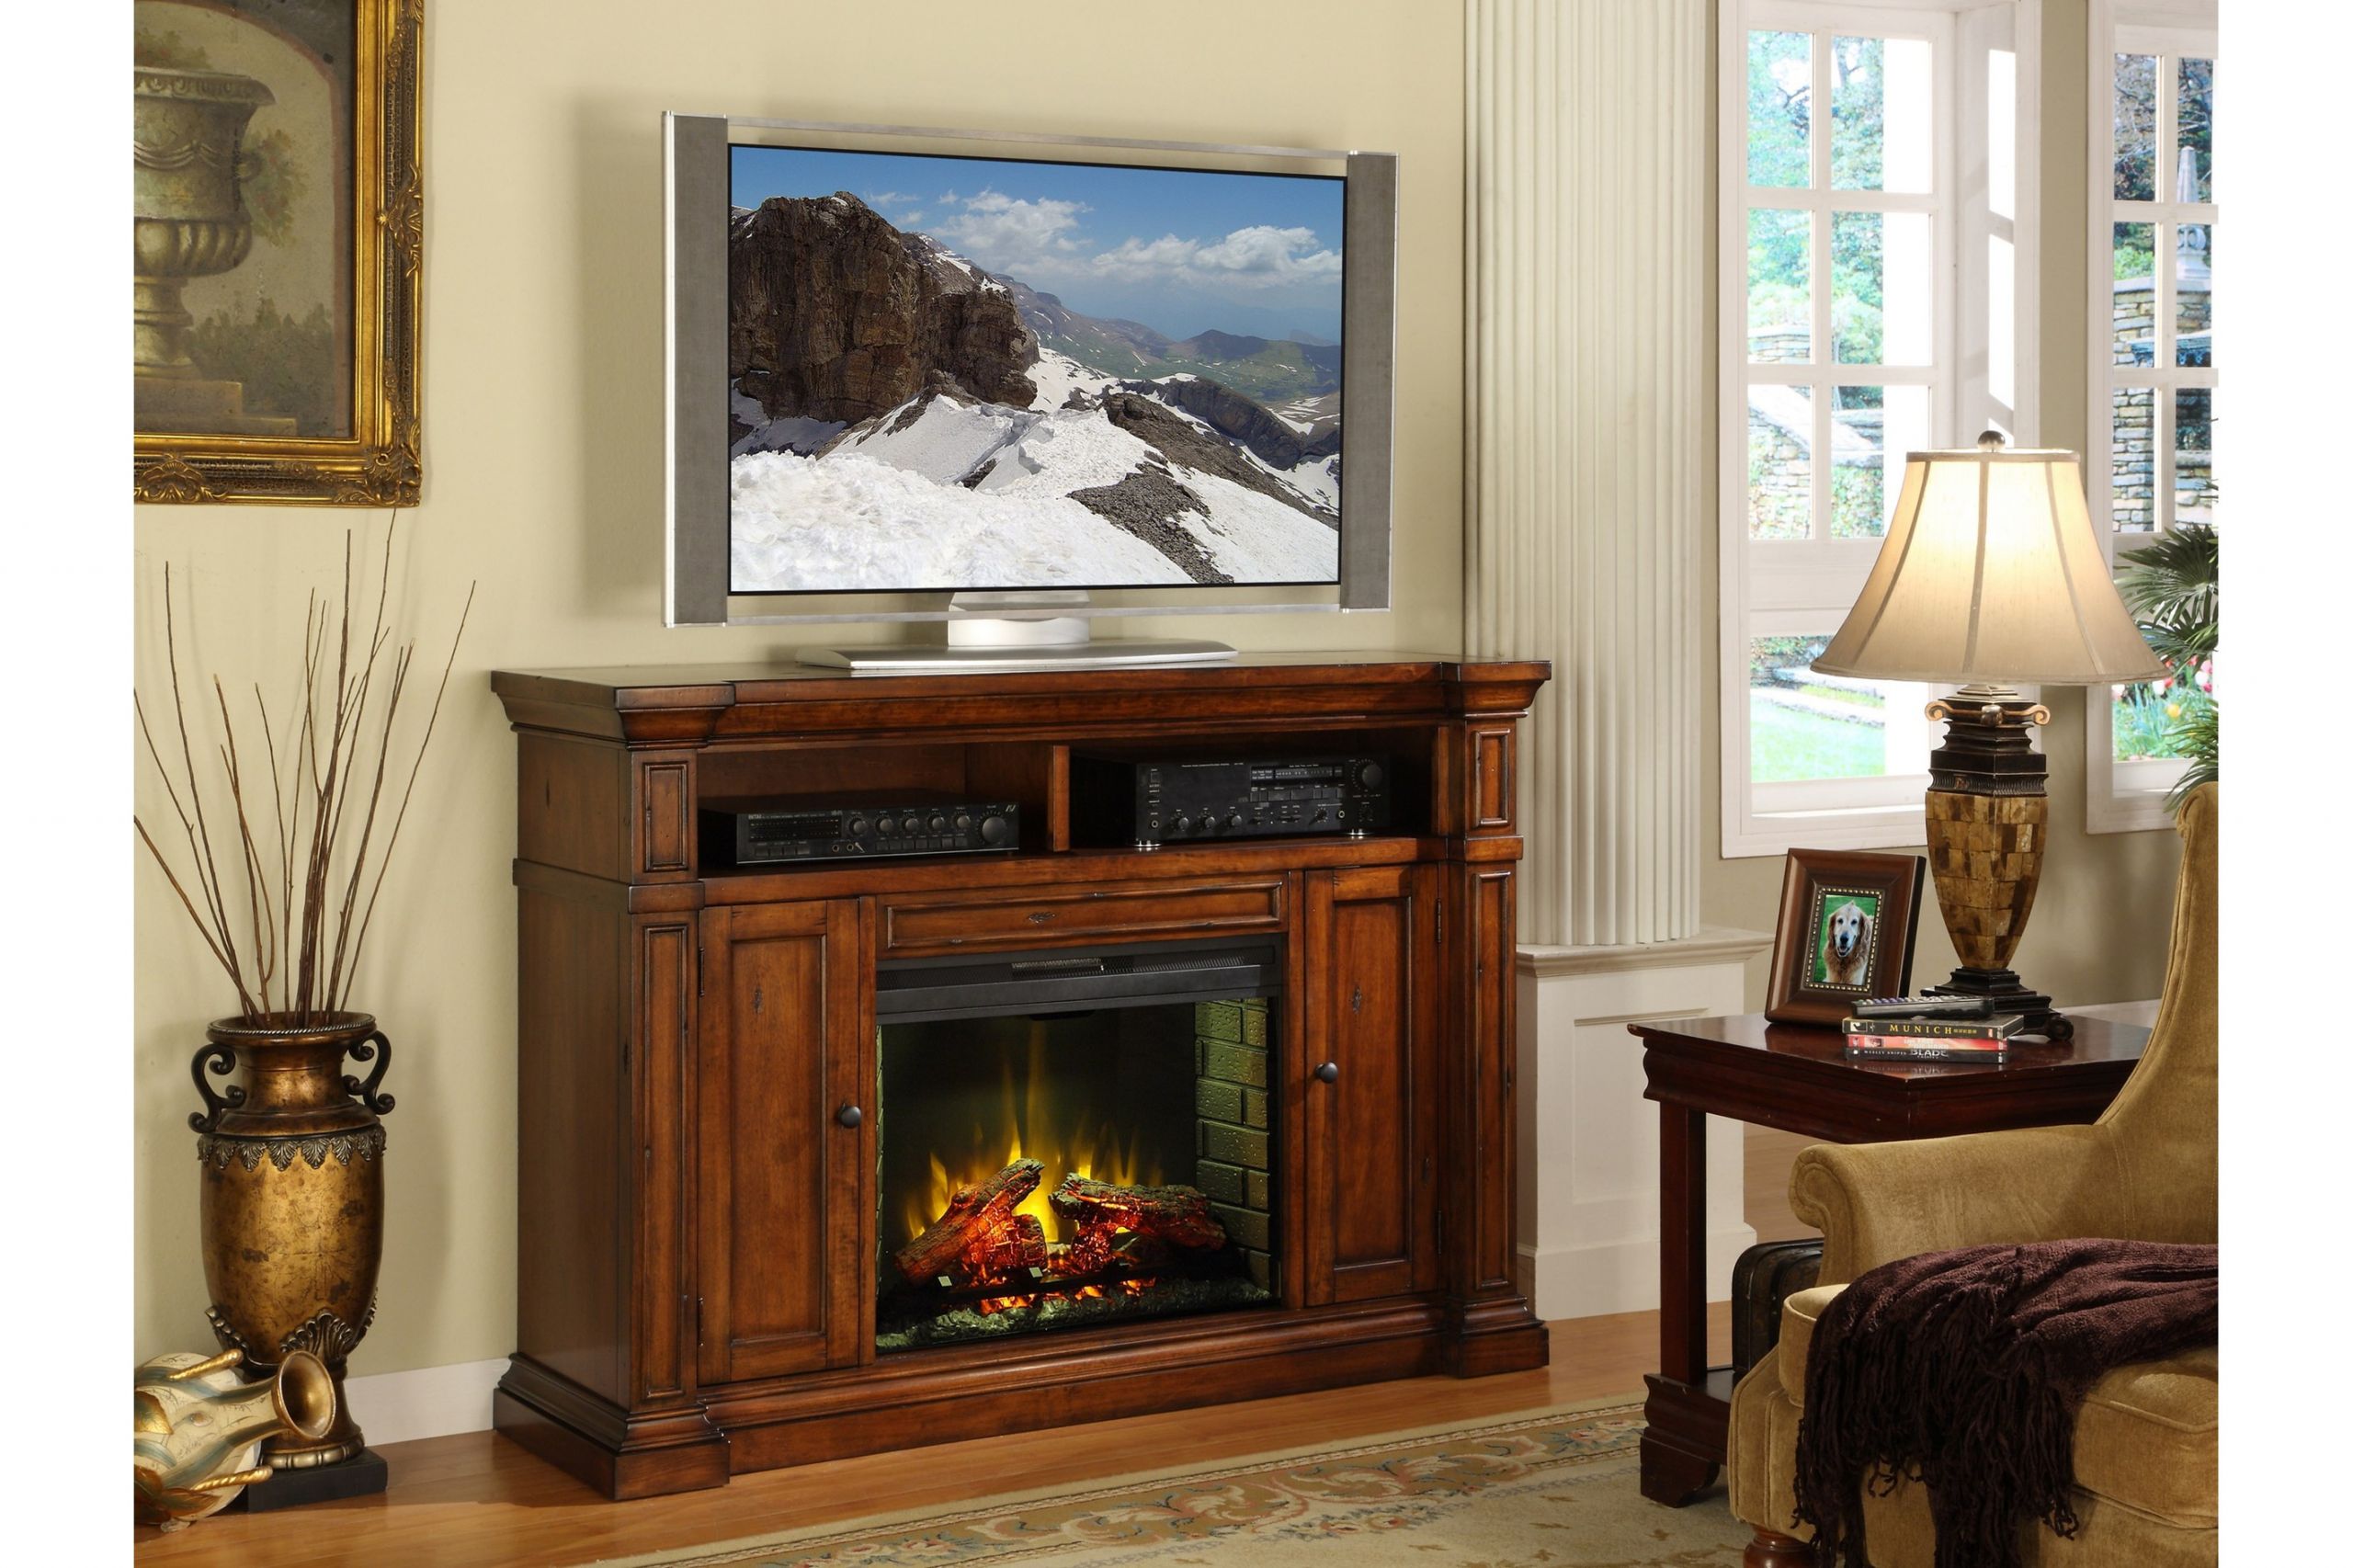 Duraflame Electric Fireplace Tv Stand
 Lowes TV Stand Fireplace bo Home Design Ideas